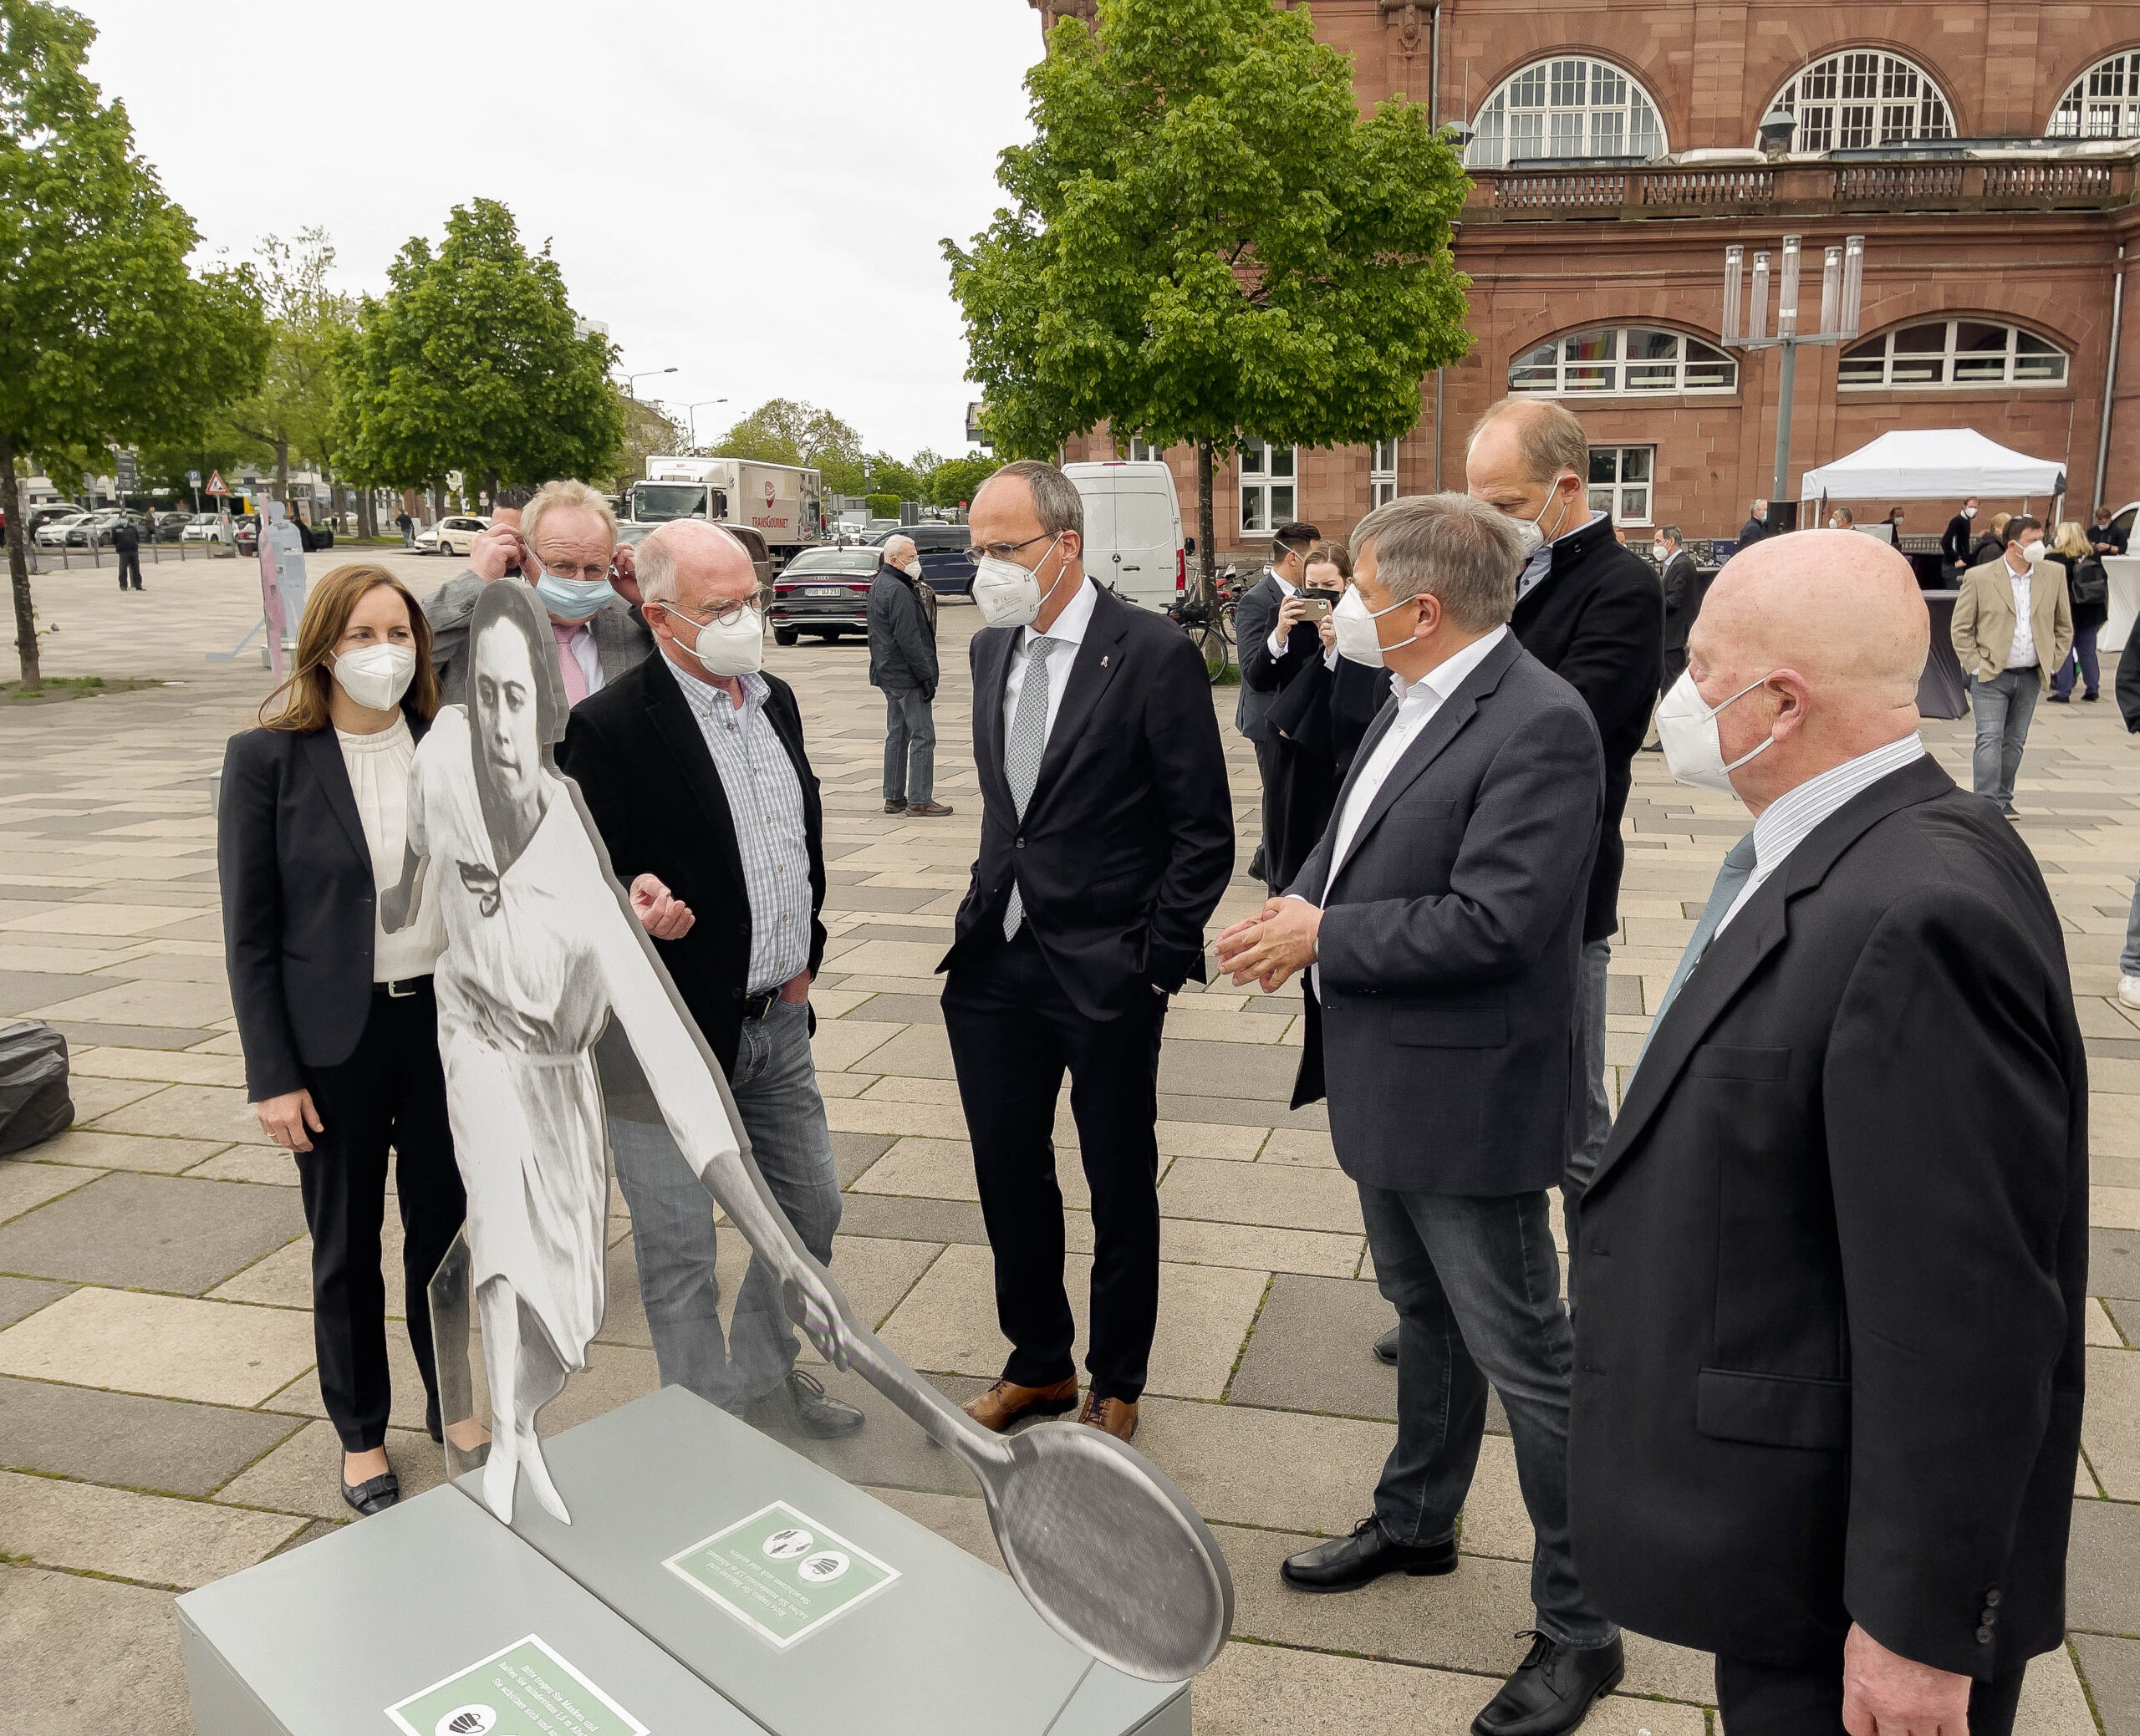 Opening of the traveling exhibition "Between Success and Persecution - Jewish Stars in German Sports until 1933 and After" on the forecourt of Wiesbaden Central Station in May 2021. Photographer: Igor Eisenschtat. Collection Jewish Community Wiesbaden